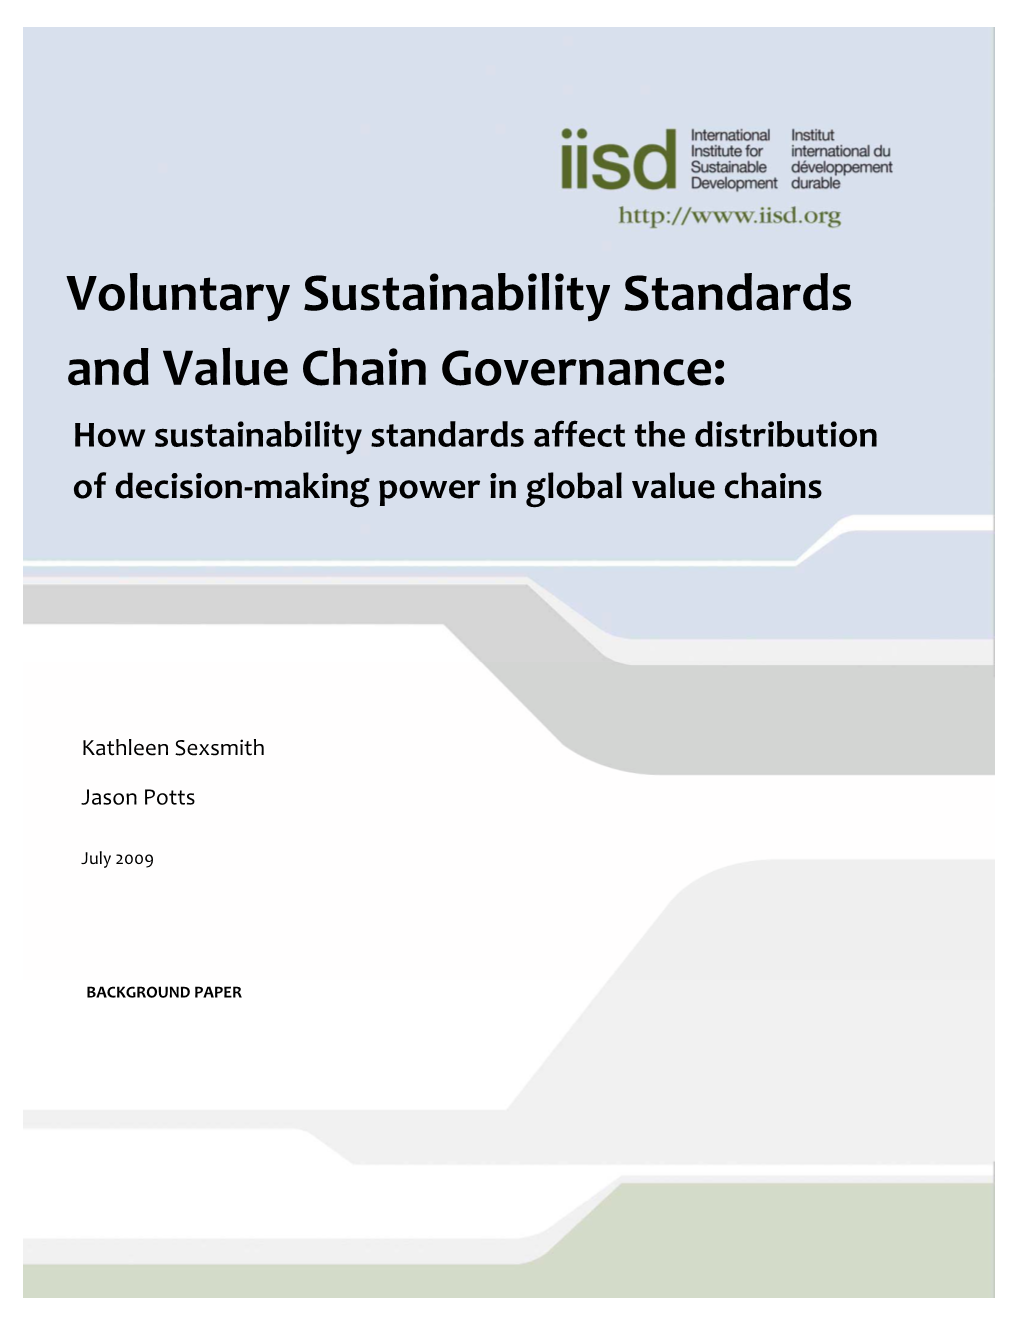 Voluntary Sustainability Standards and Value Chain Governance